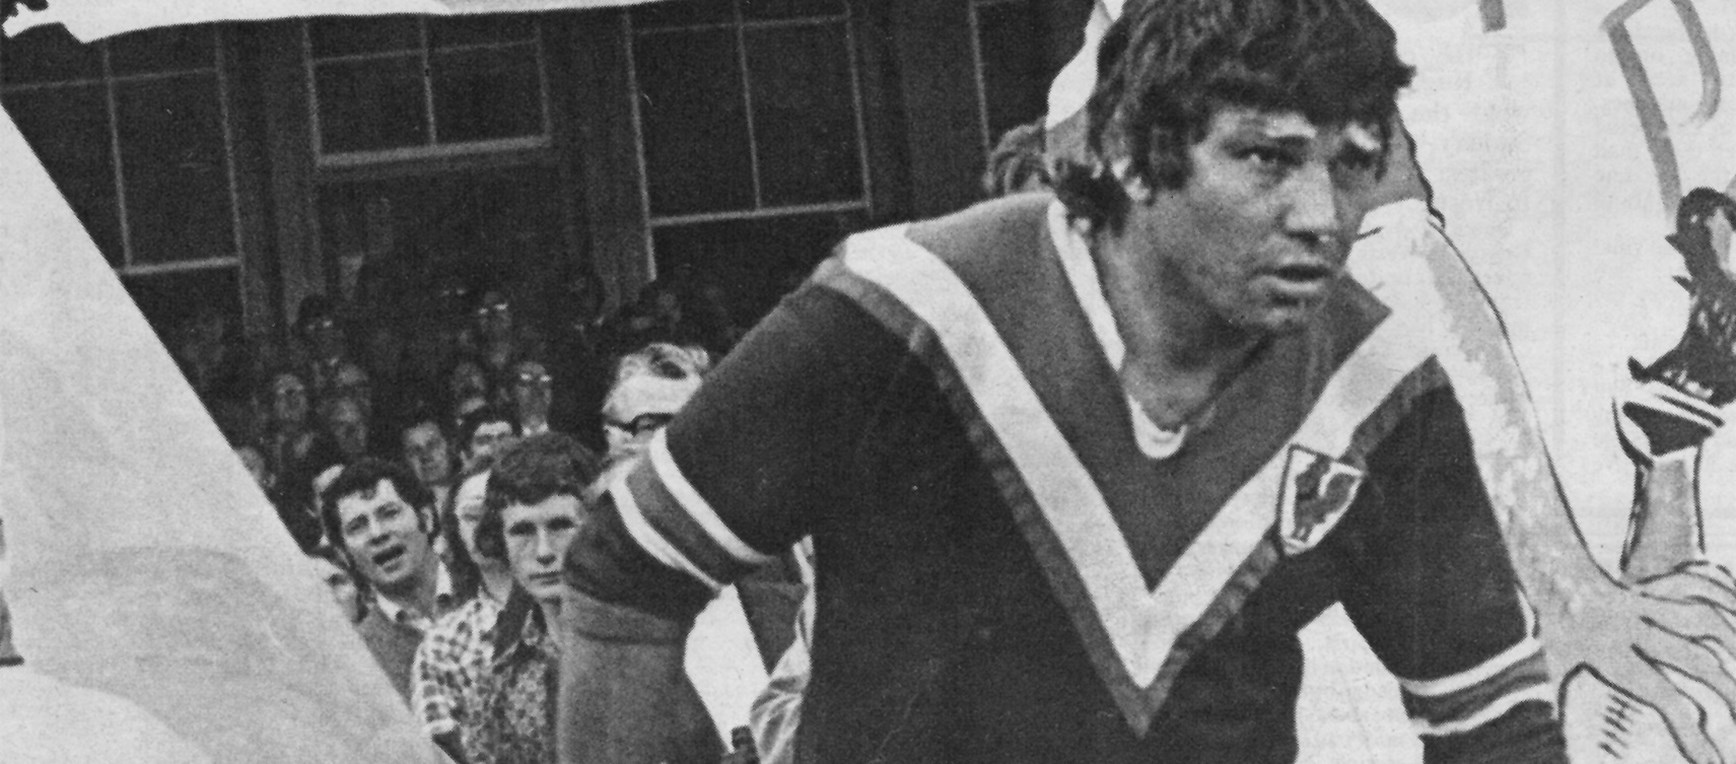 Rugby league icons: Arthur Beetson